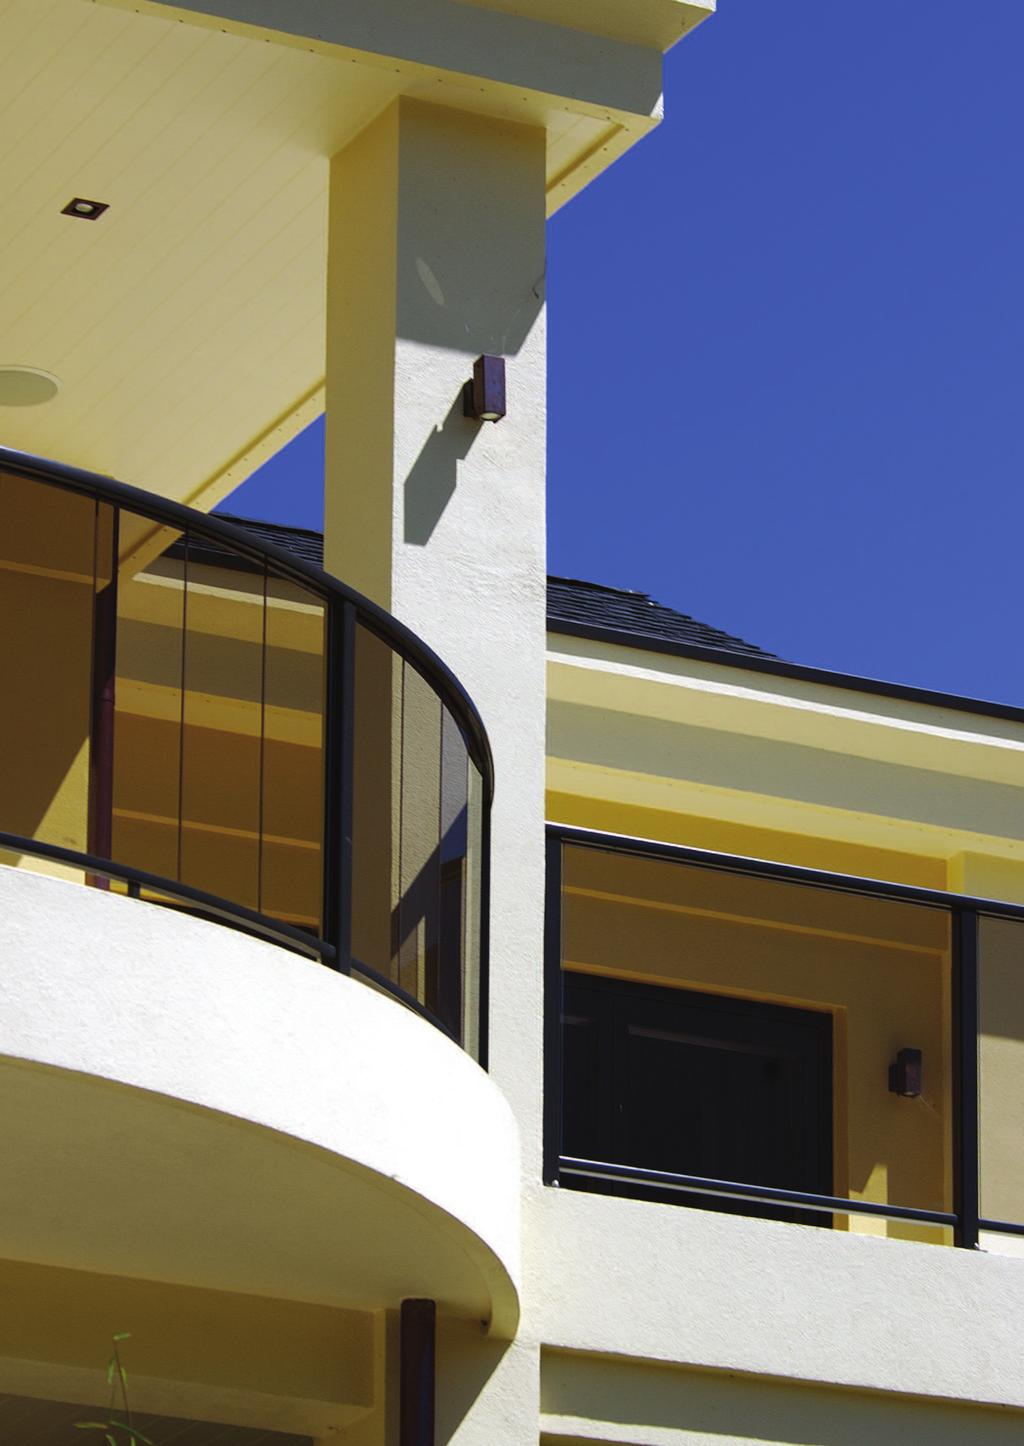 Strength and simplicity Aluma is a cost-effective aluminium balustrade system with a crisp, contemporary flavour.